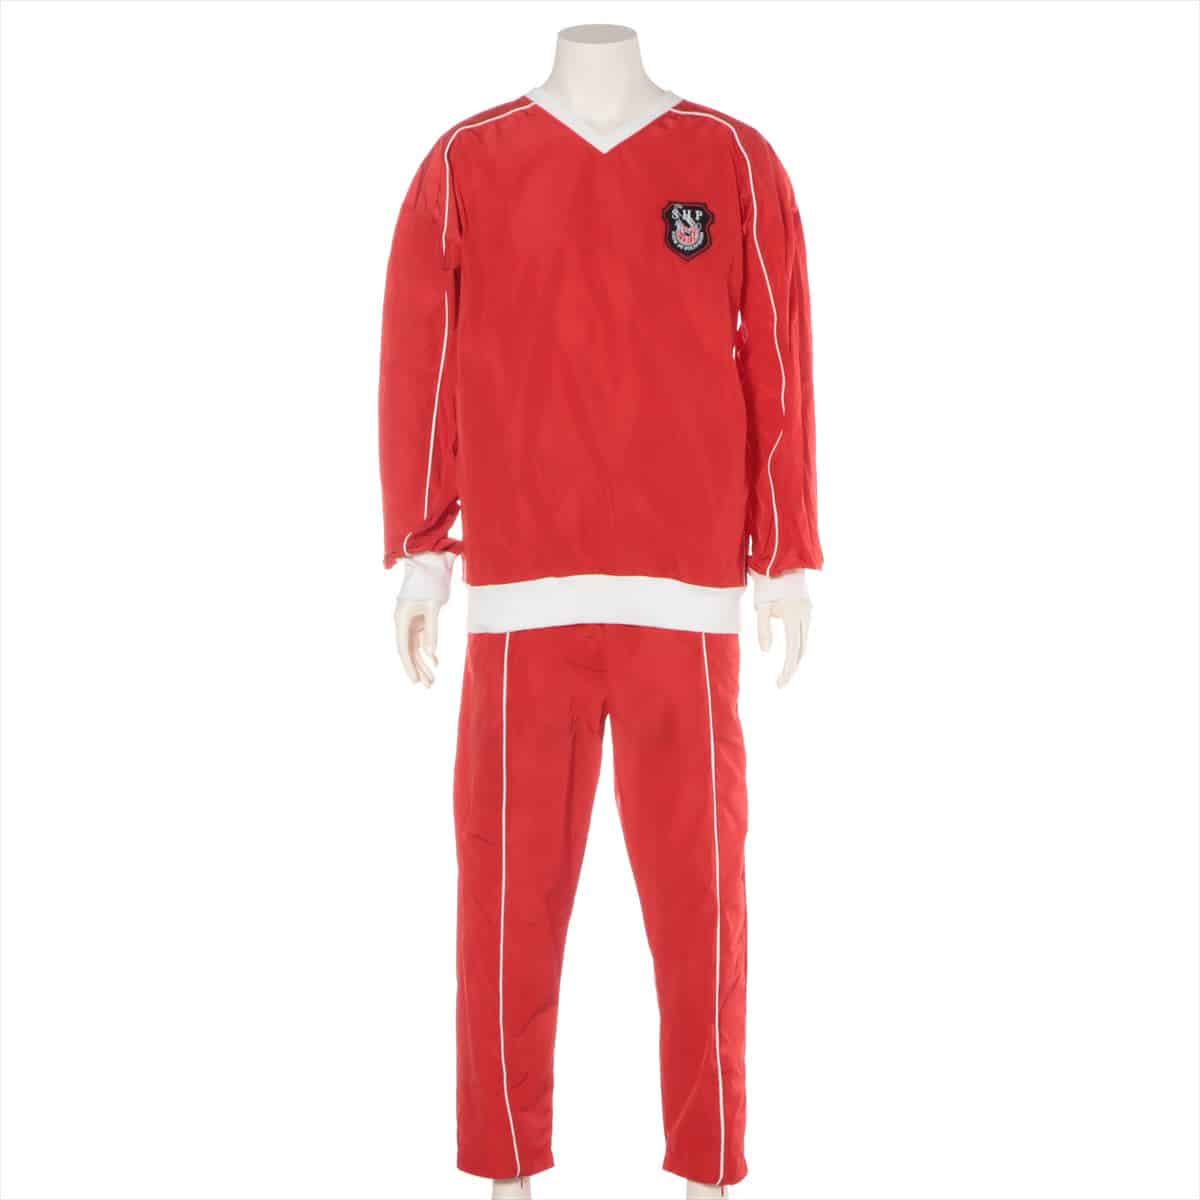 Shoup Polyester Sweatsuit M Men's Red  Setup